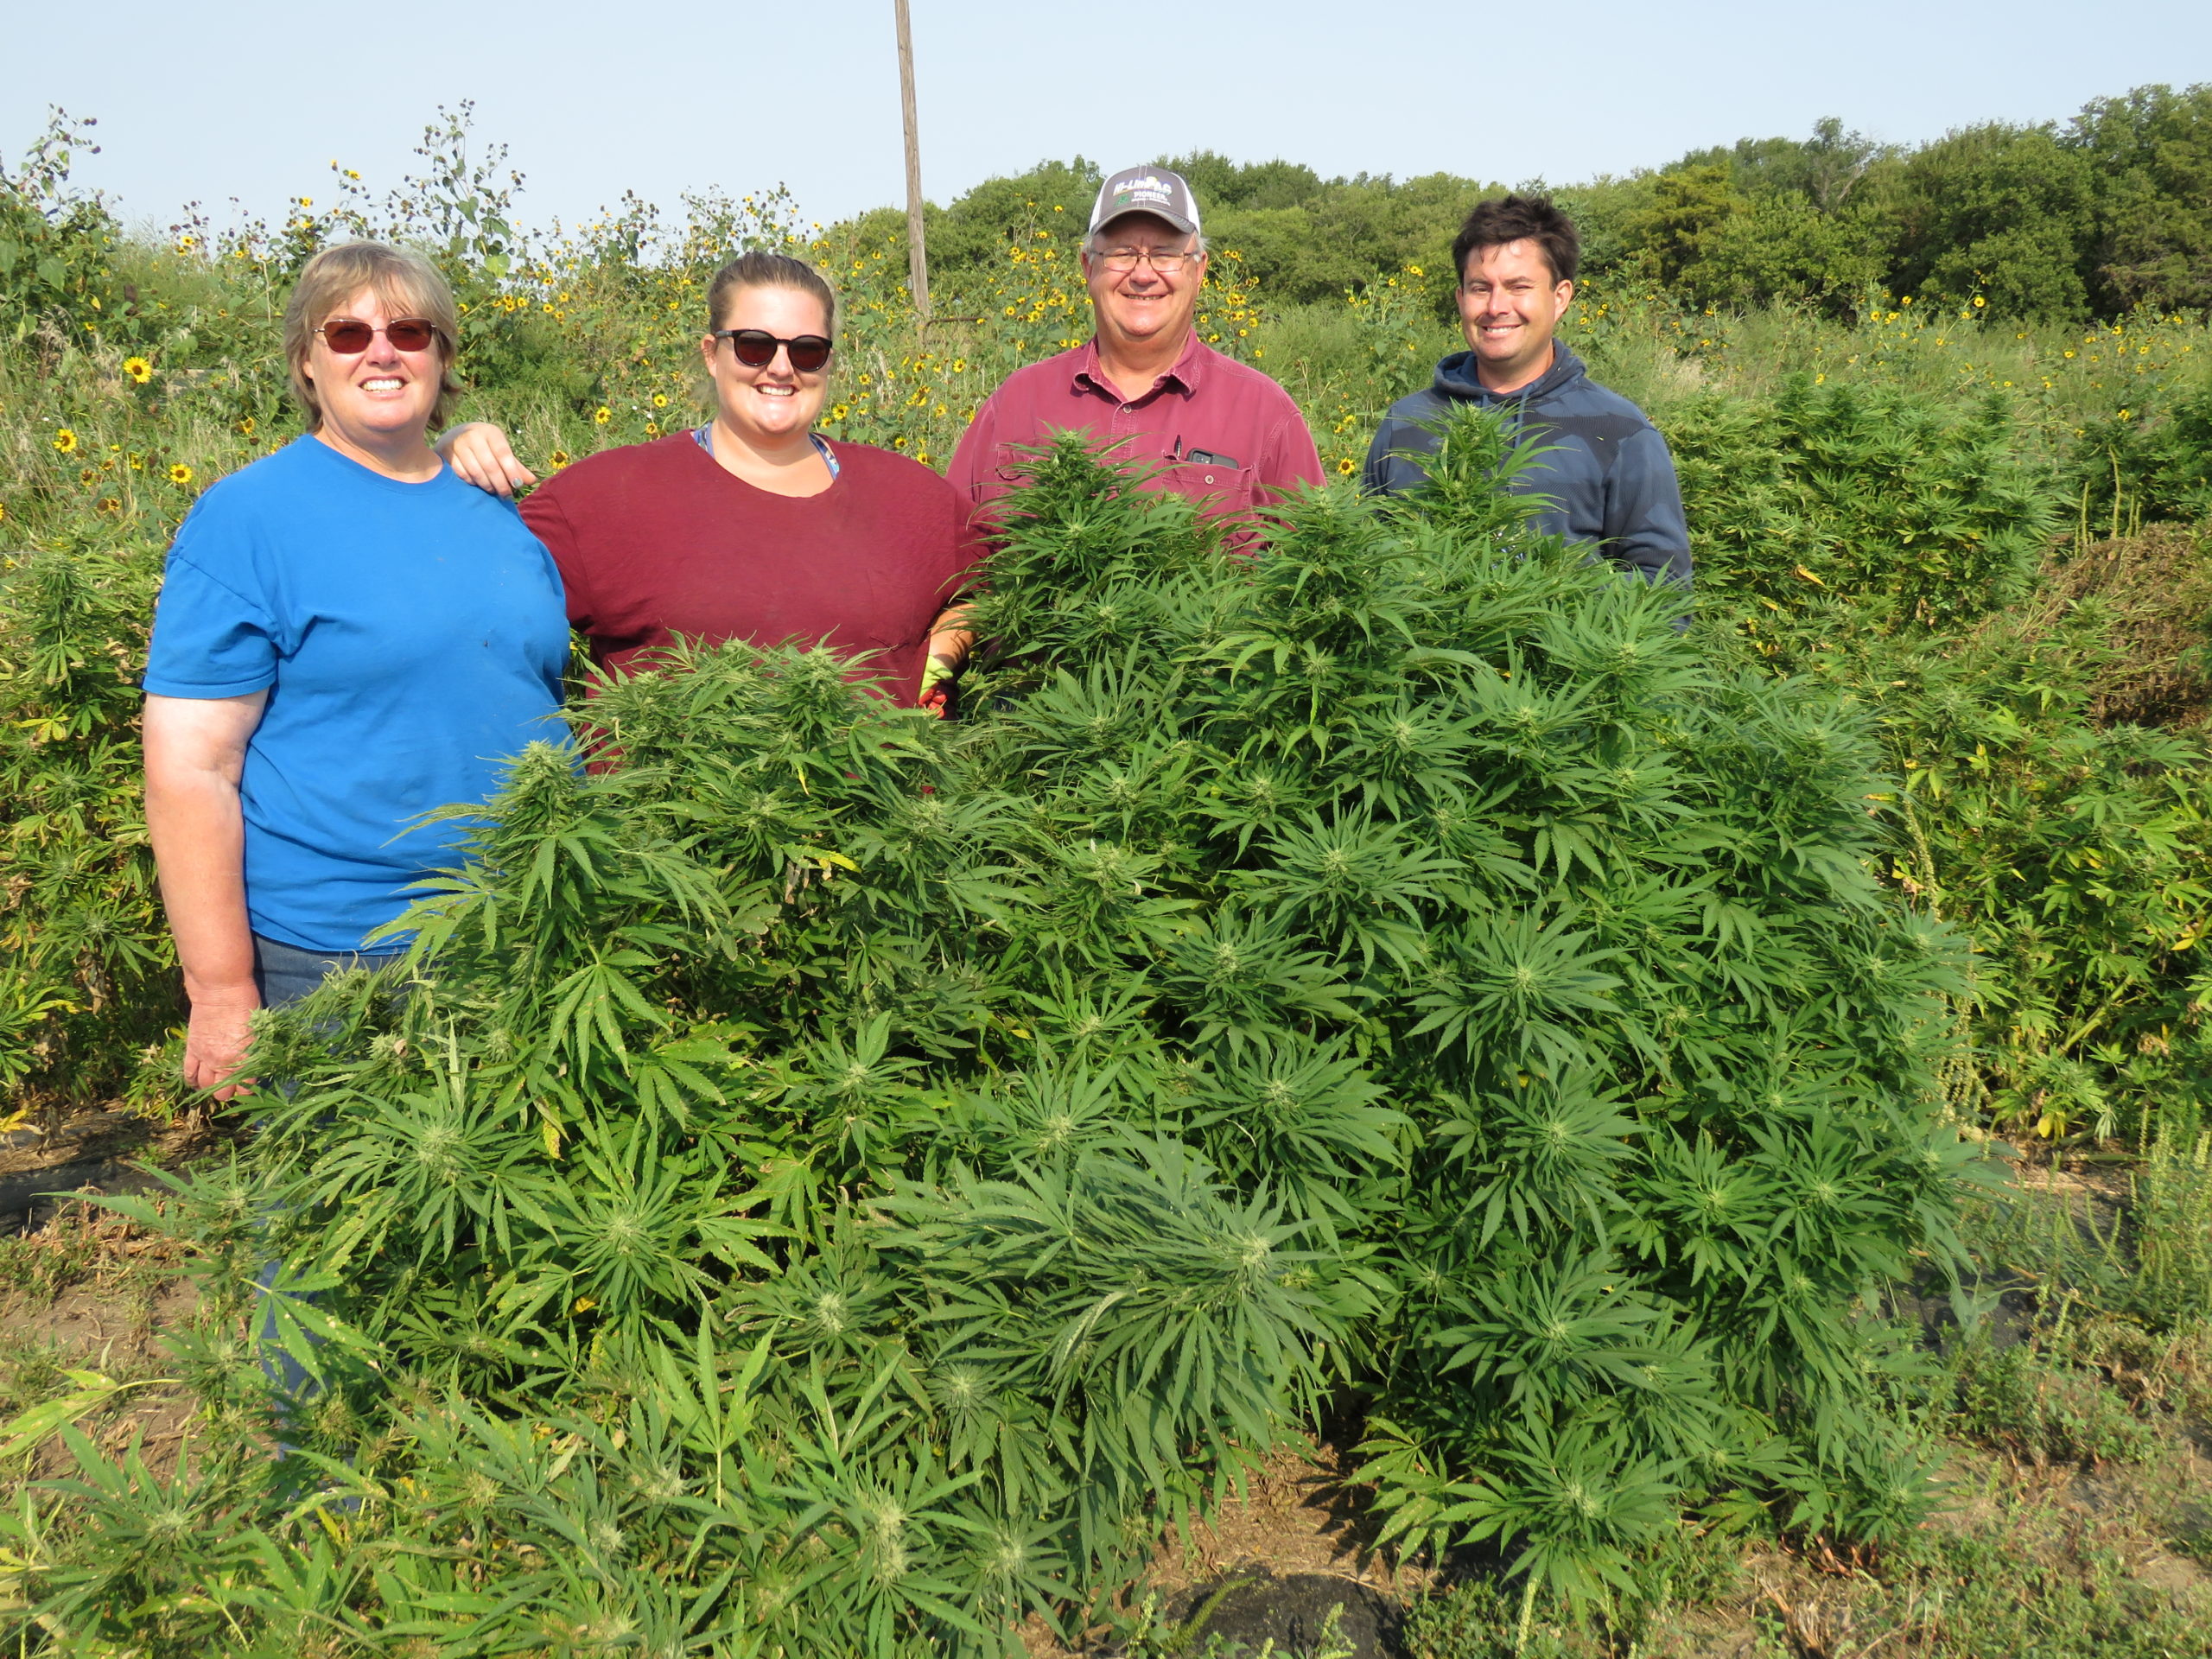 The Schwarzes, from left, Linda, Becky, Tom and Alex, have grown hemp since 2020, the first year Nebraska issued licenses to growers and processors. Their main farming business near Smithfield is growing certified organic corn, soybeans, alfalfa, field peas and cane. (Photo by Lori Potter, Flatwater Free Press)